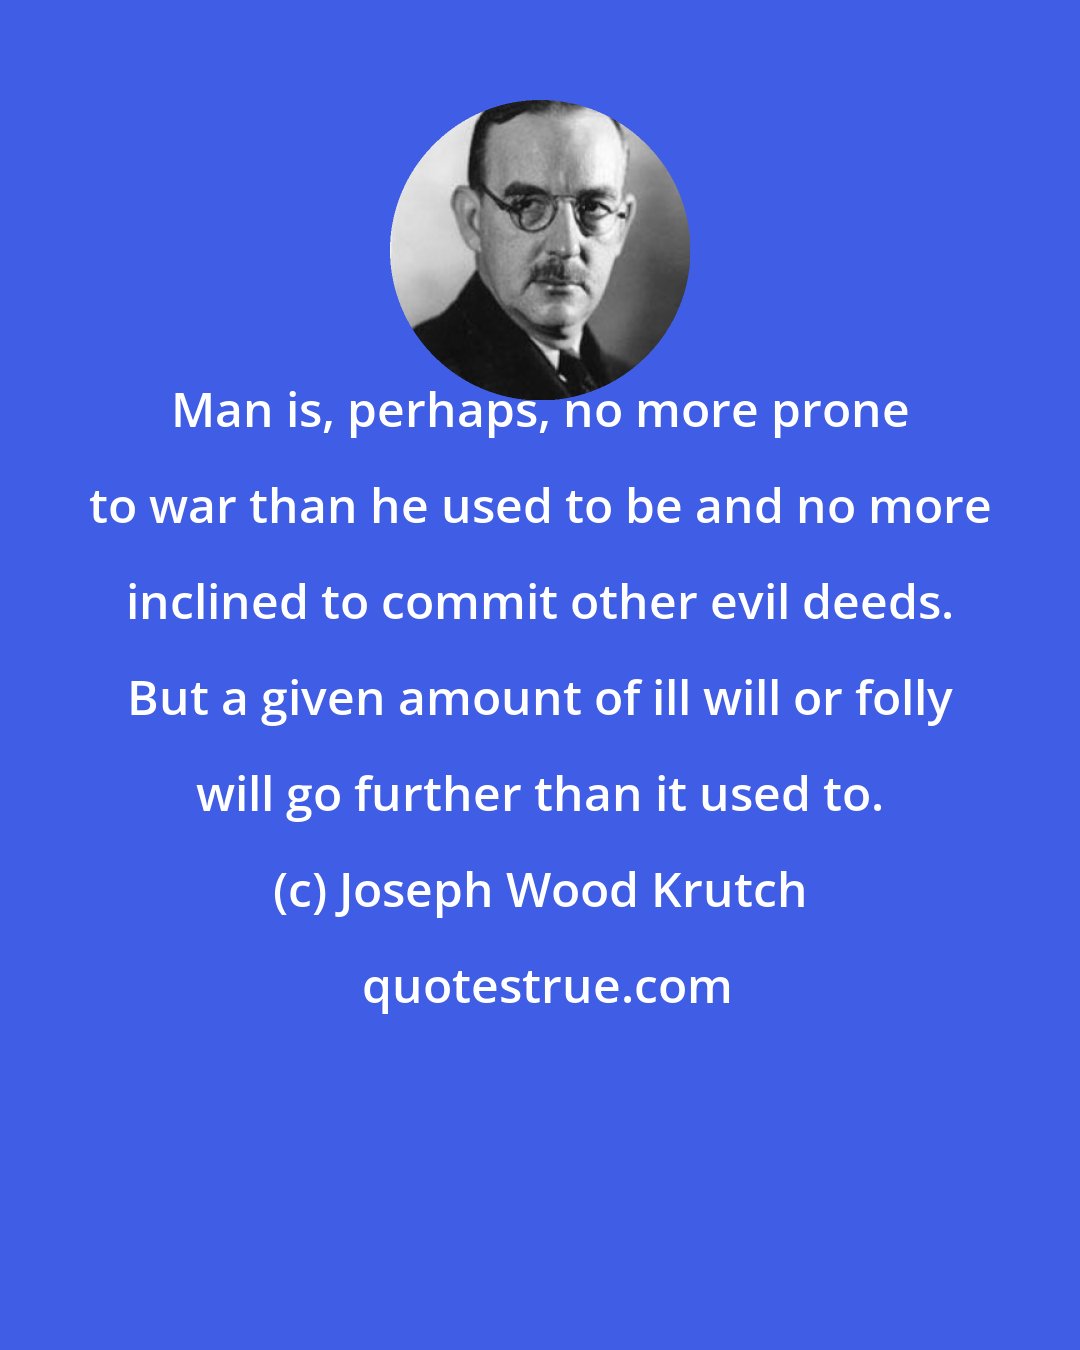 Joseph Wood Krutch: Man is, perhaps, no more prone to war than he used to be and no more inclined to commit other evil deeds. But a given amount of ill will or folly will go further than it used to.